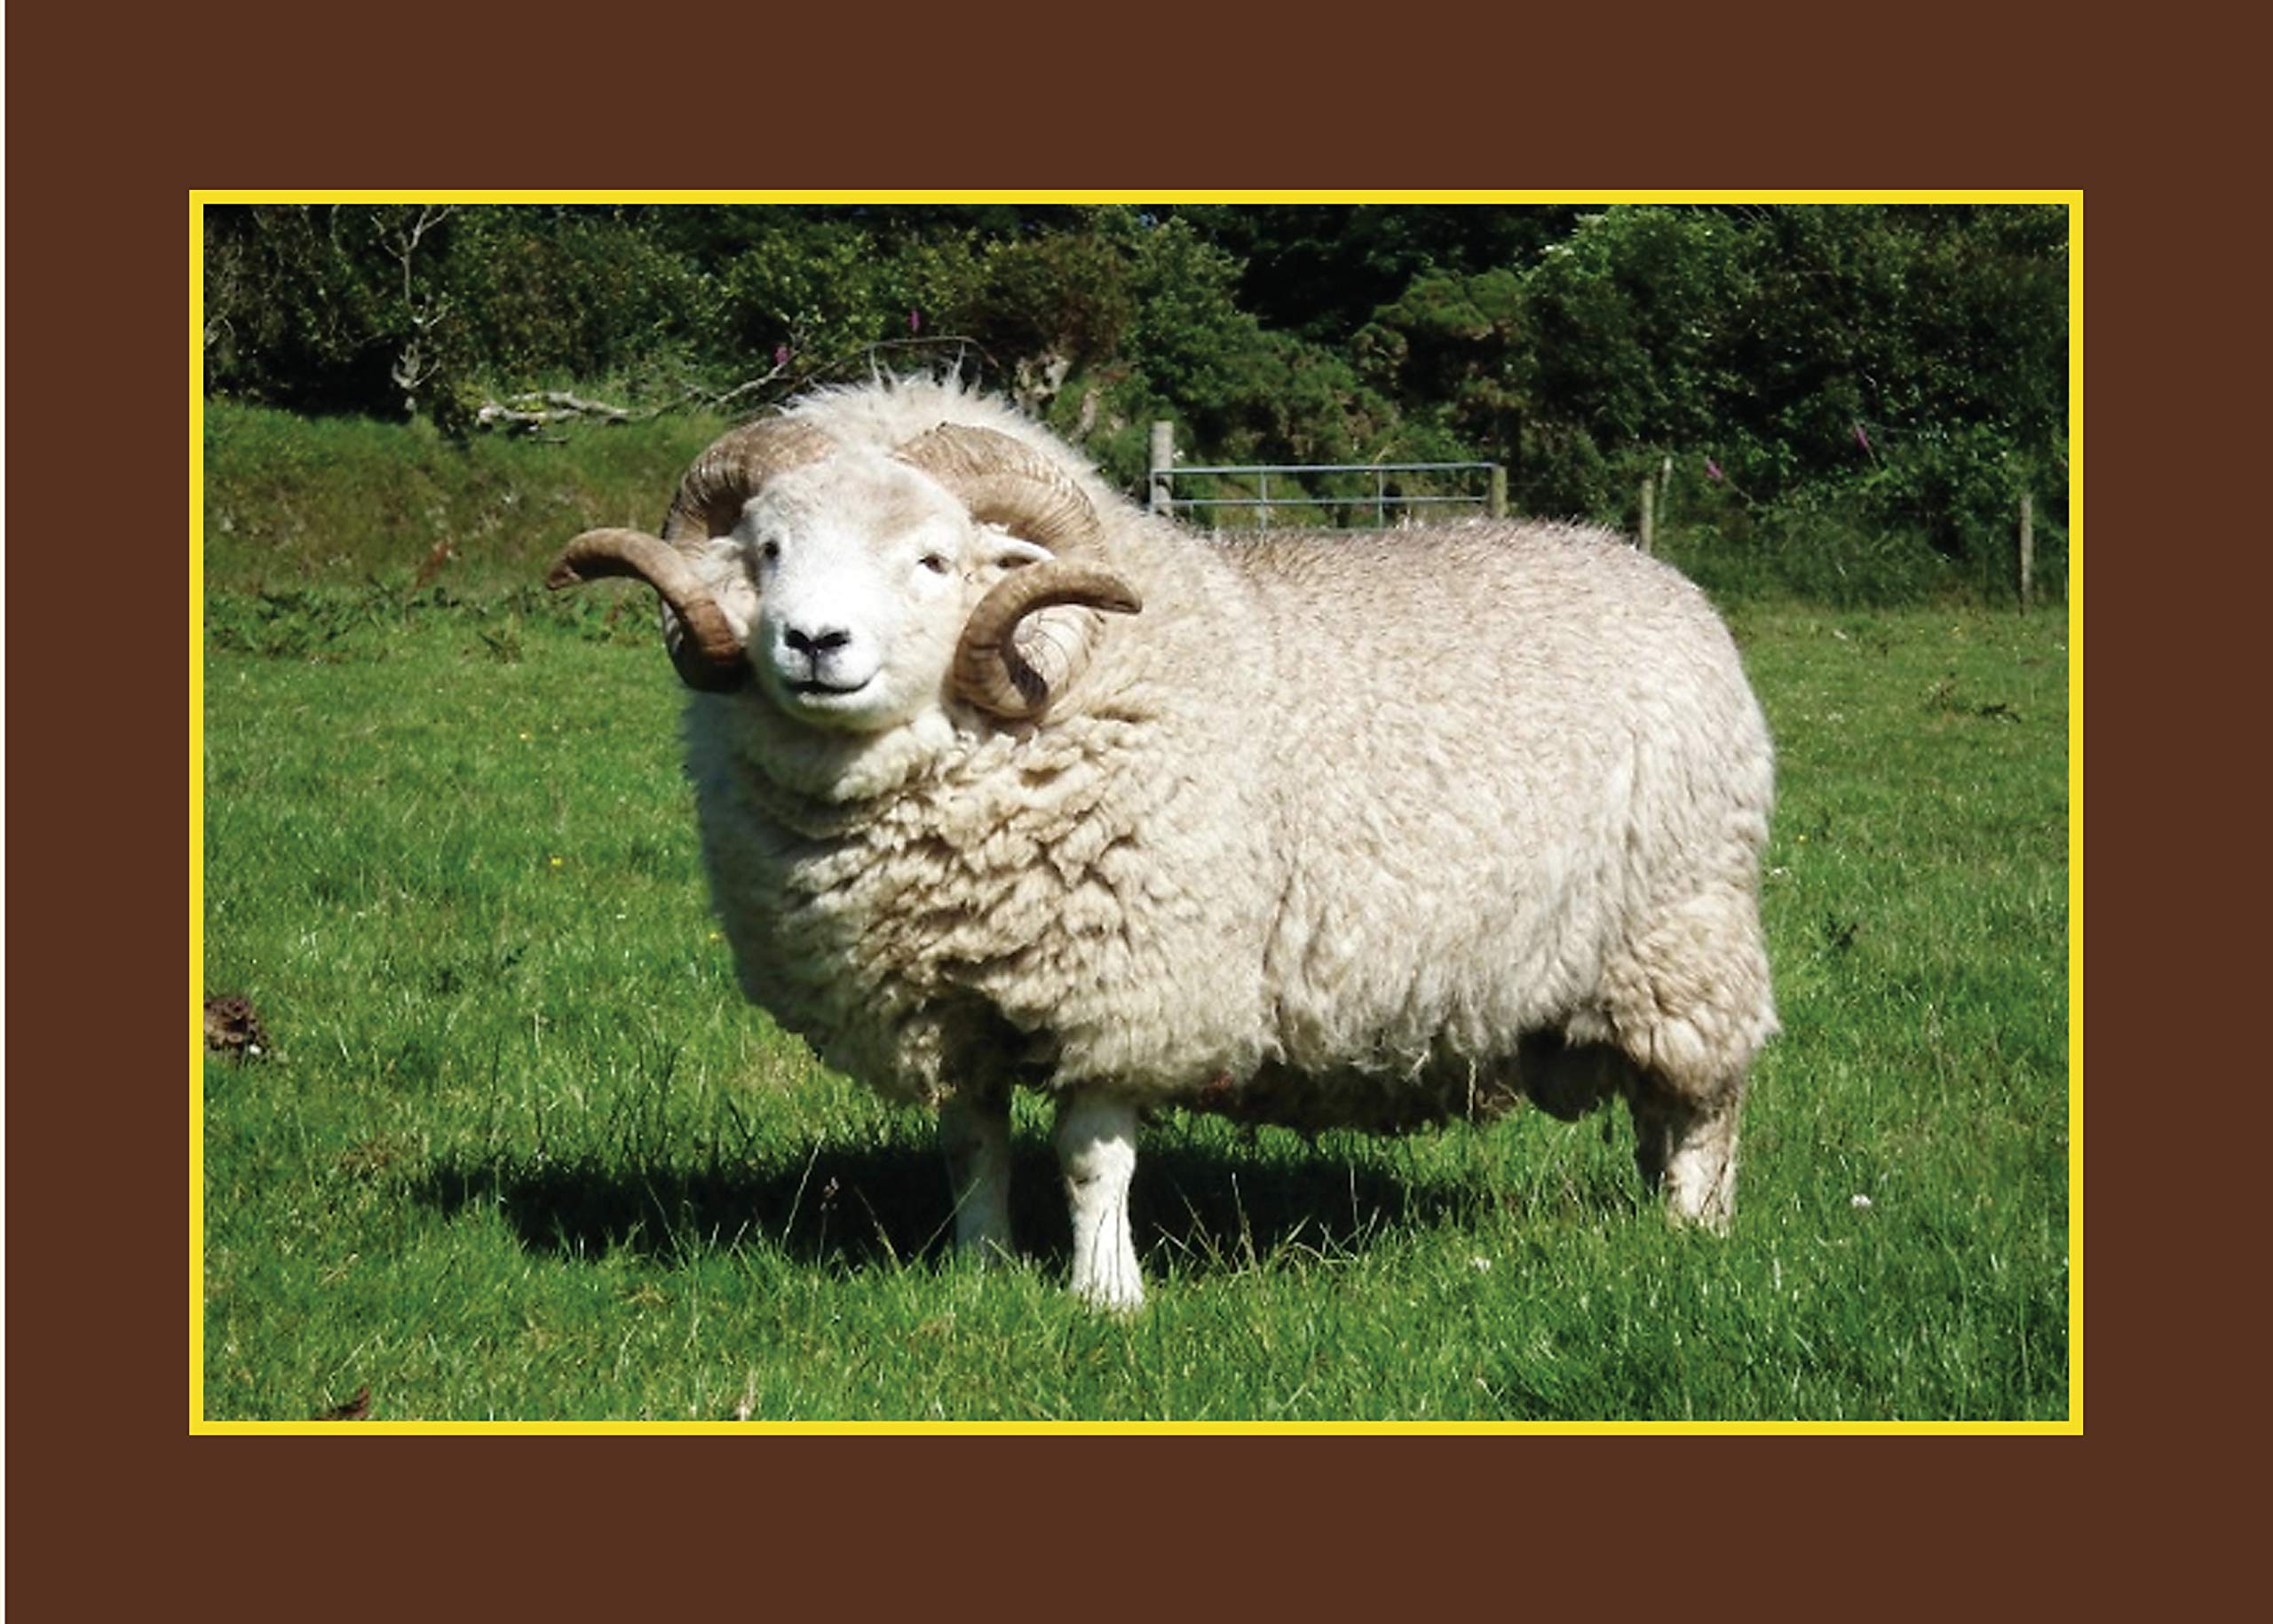 Know Your Sheep (Old Pond Books) 44 Sheep Breeds from Beulah Speckled Face to Wensleydale, with Full-Page Photos and Comprehensive Descriptions of the Appearance, History, Wool Quality, and More